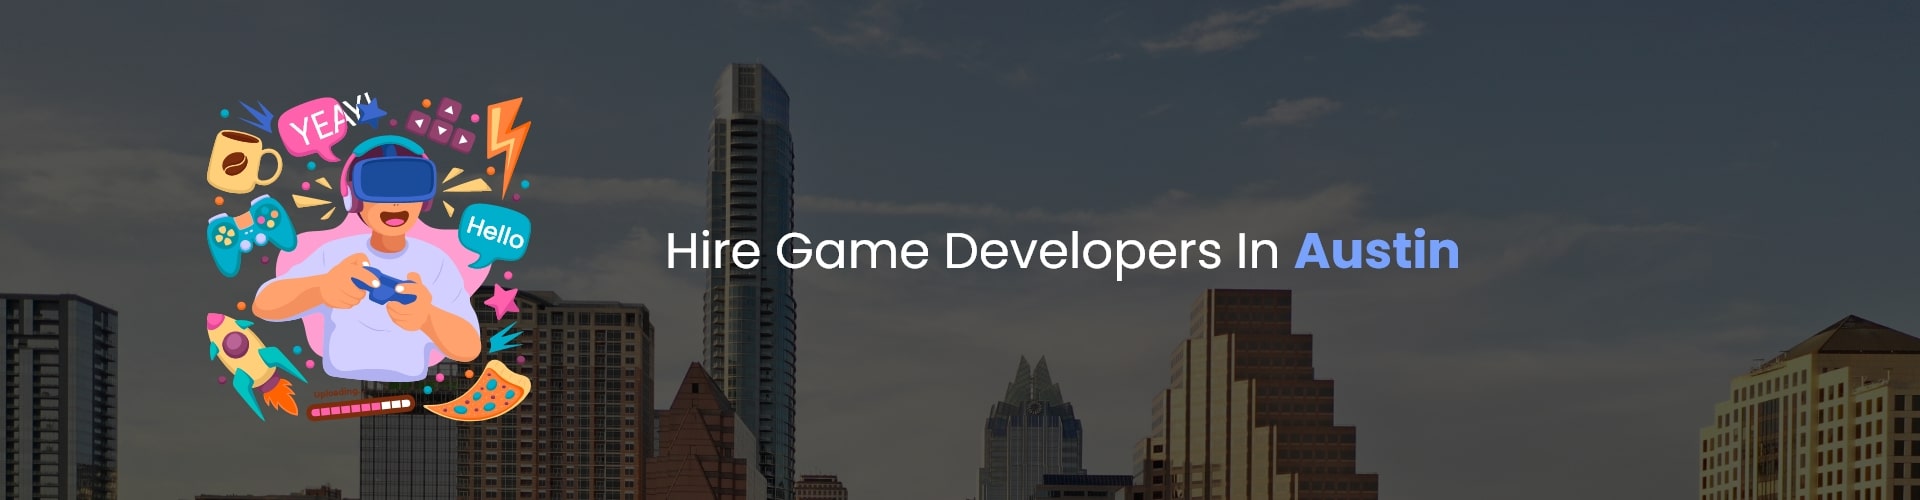 hire game developers in austin